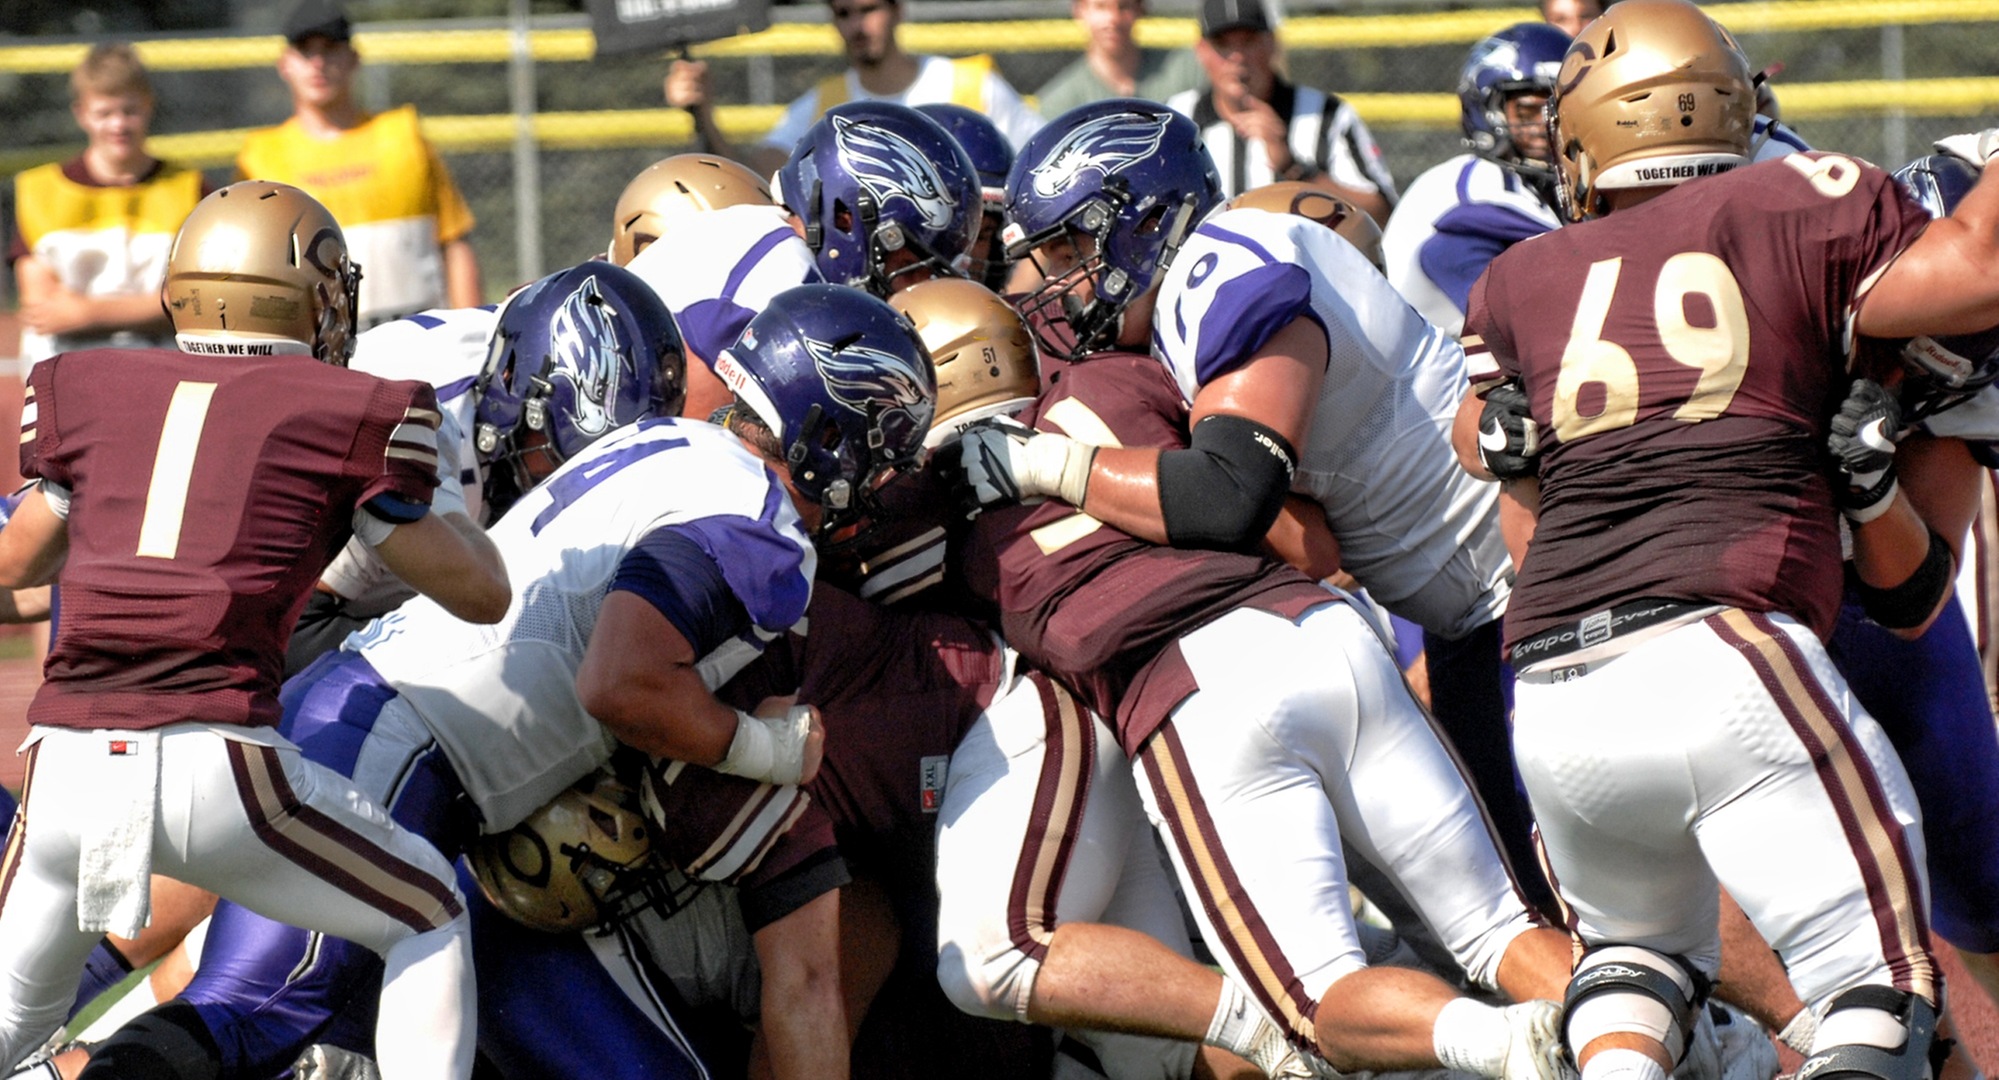 The Cobber defense only allowed 83 yards and eight first downs in the second half at #12 Wis.-Whitewater.